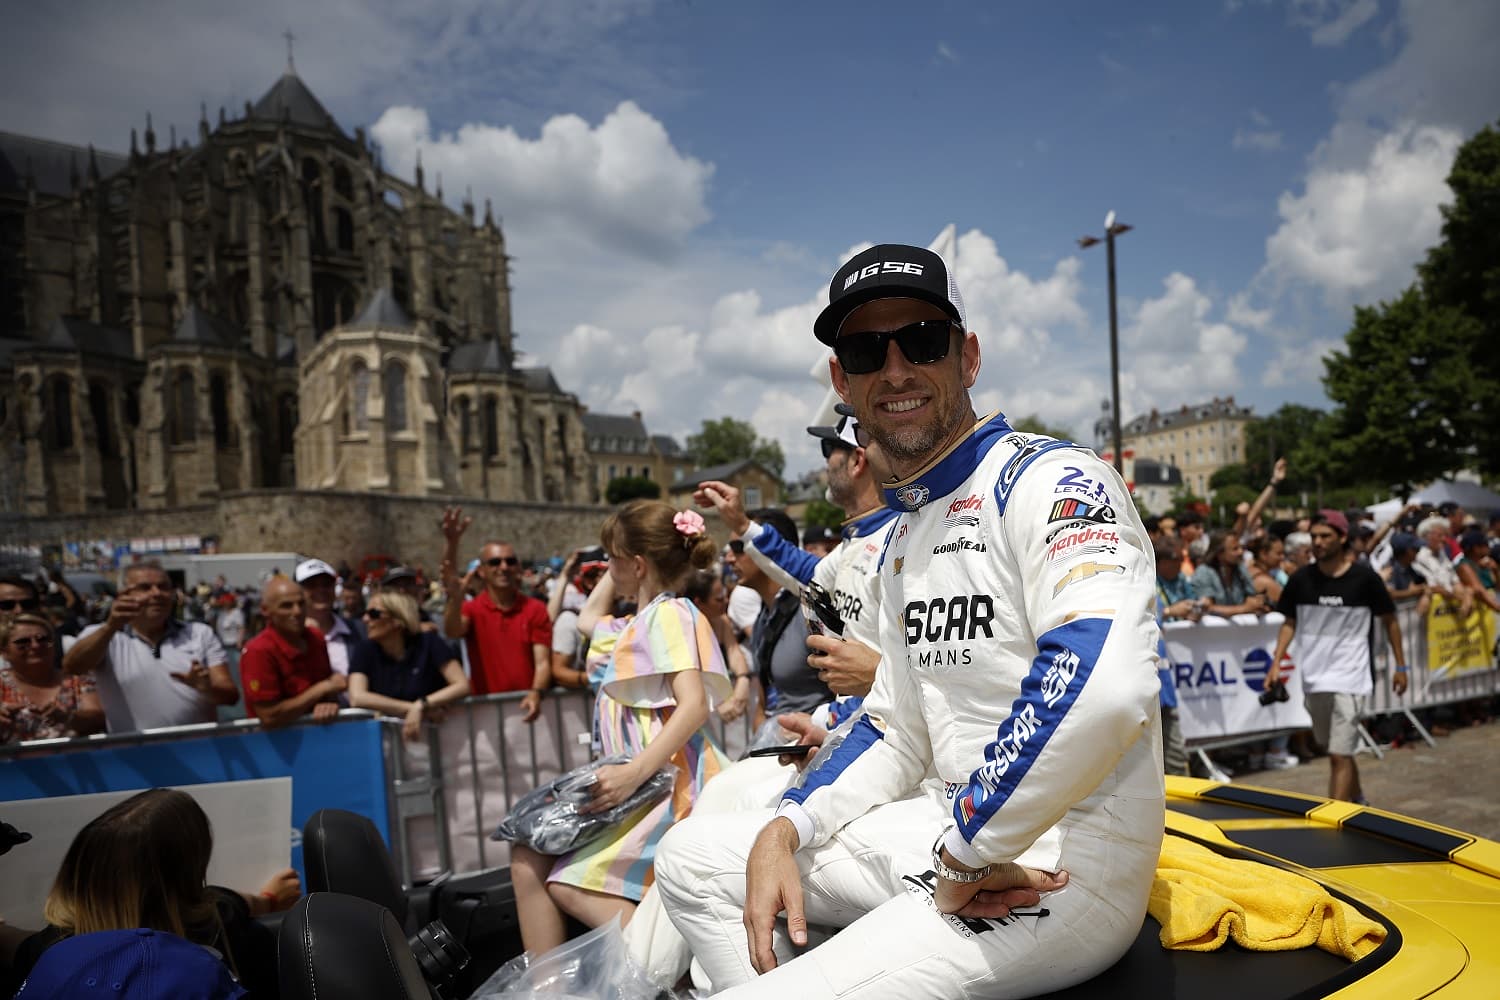 Jimmie Johnson, Mike Rockenfeller and Jenson Button of the NASCAR Next Gen Chevrolet ZL1 team attend the drivers parade ahead of the 100th anniversary of the 24 Hours of Le Mans at the Circuit de la Sarthe on June 9, 2023.